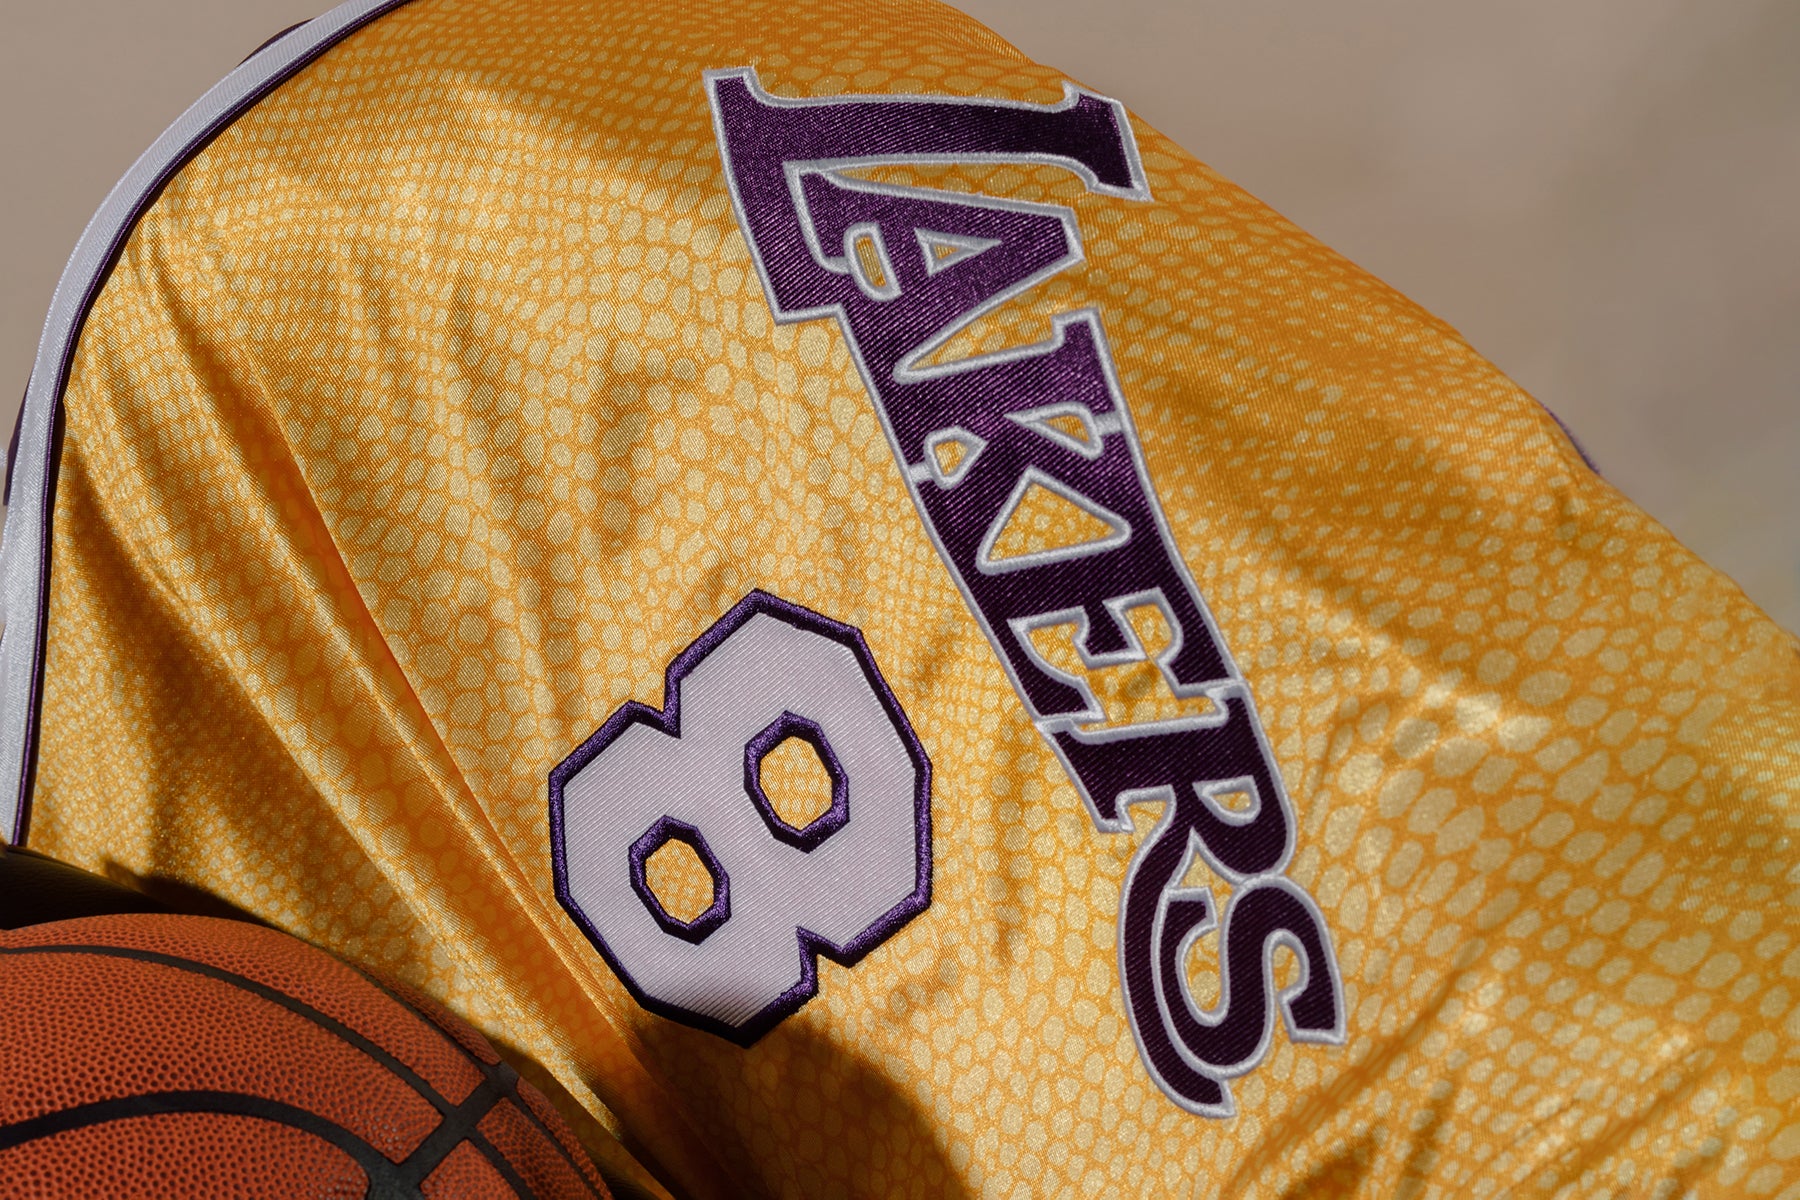 Kobe Bryant Lakers Hall of Fame Jerseys and Shorts